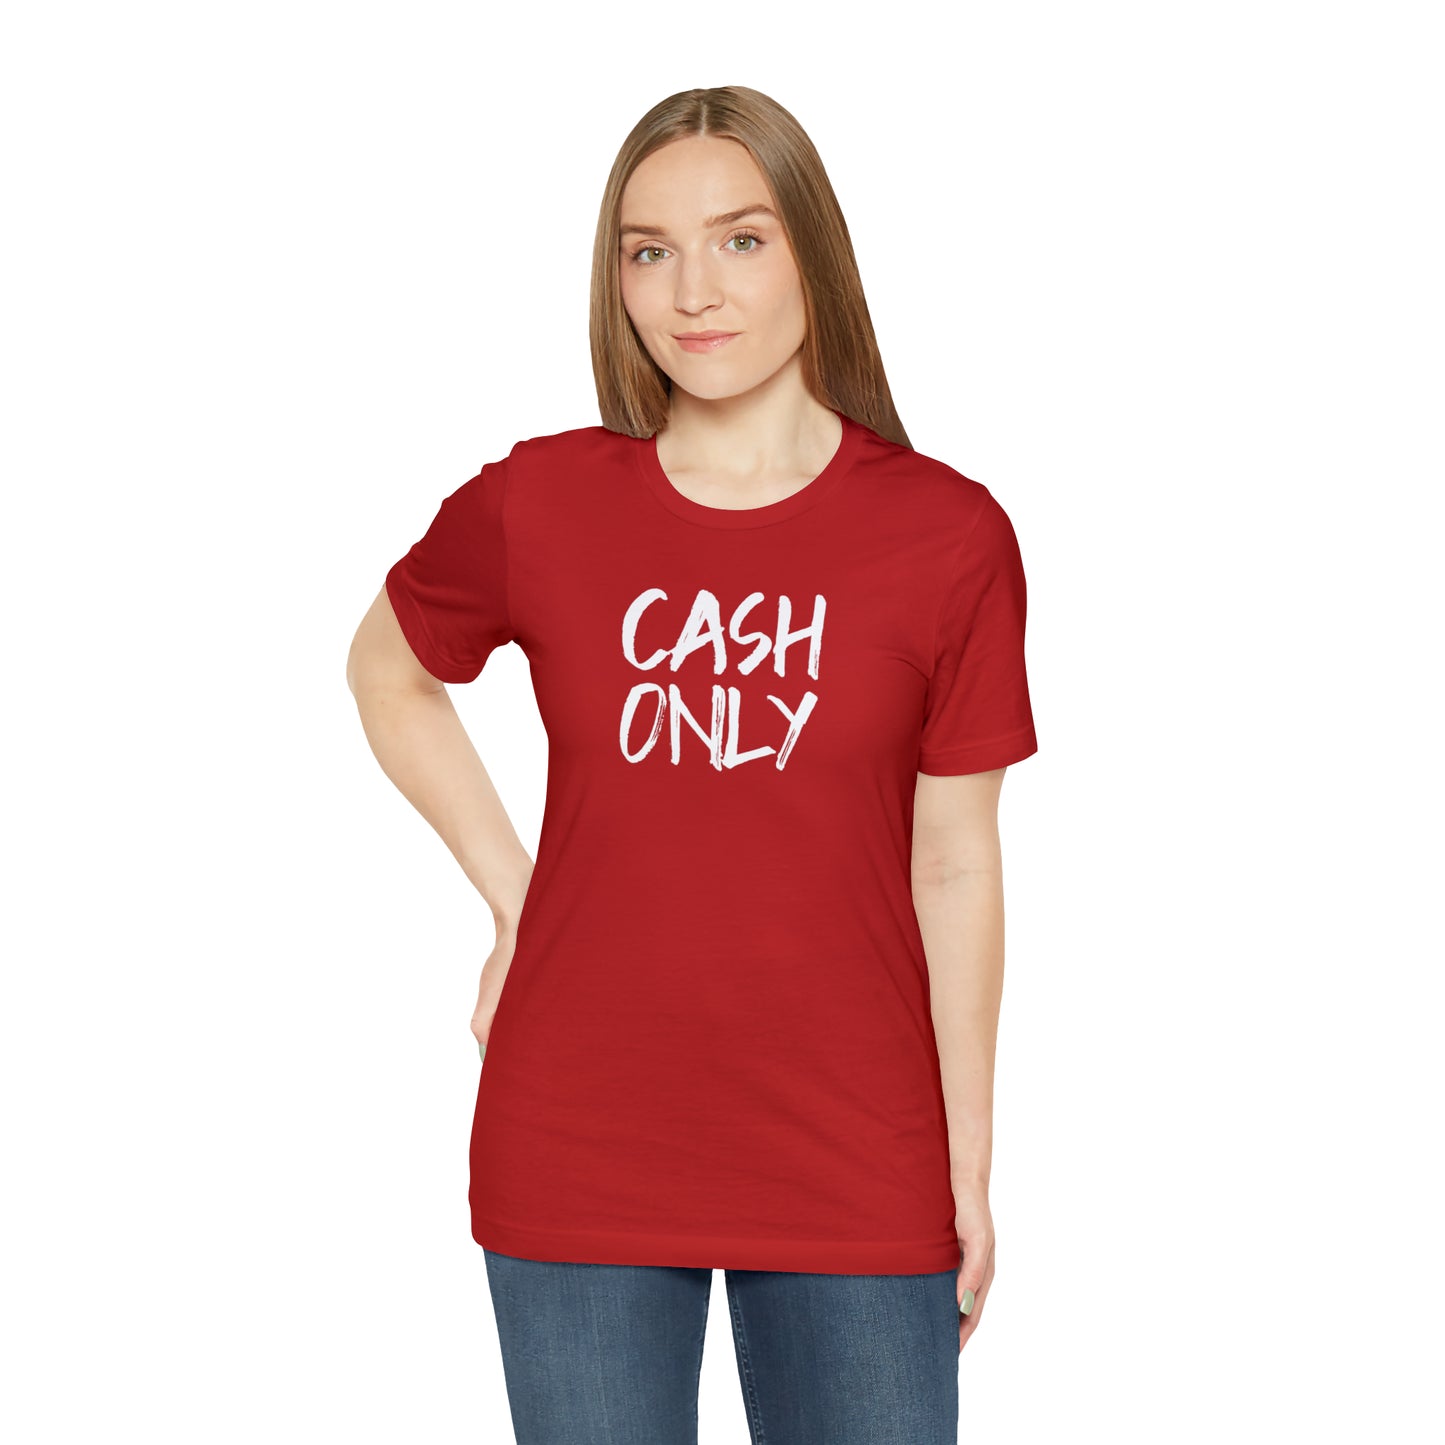 CASH ONLY